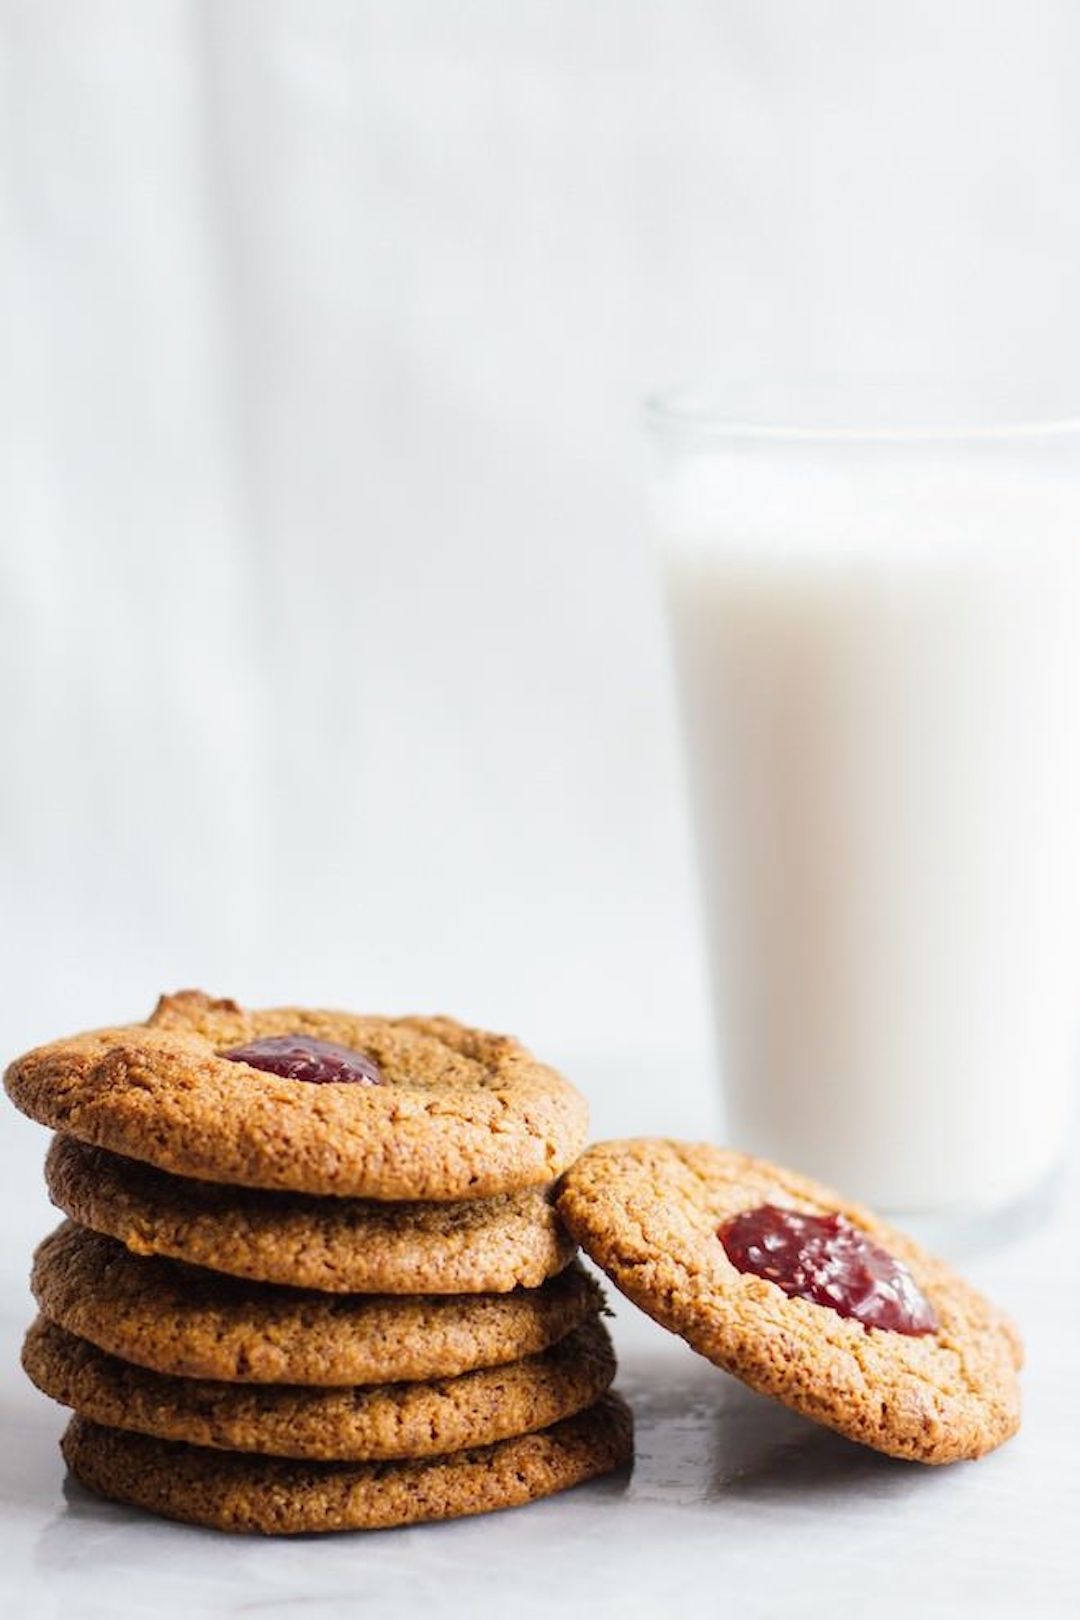 stacks of jam thumbprint cookies and a glass of milk